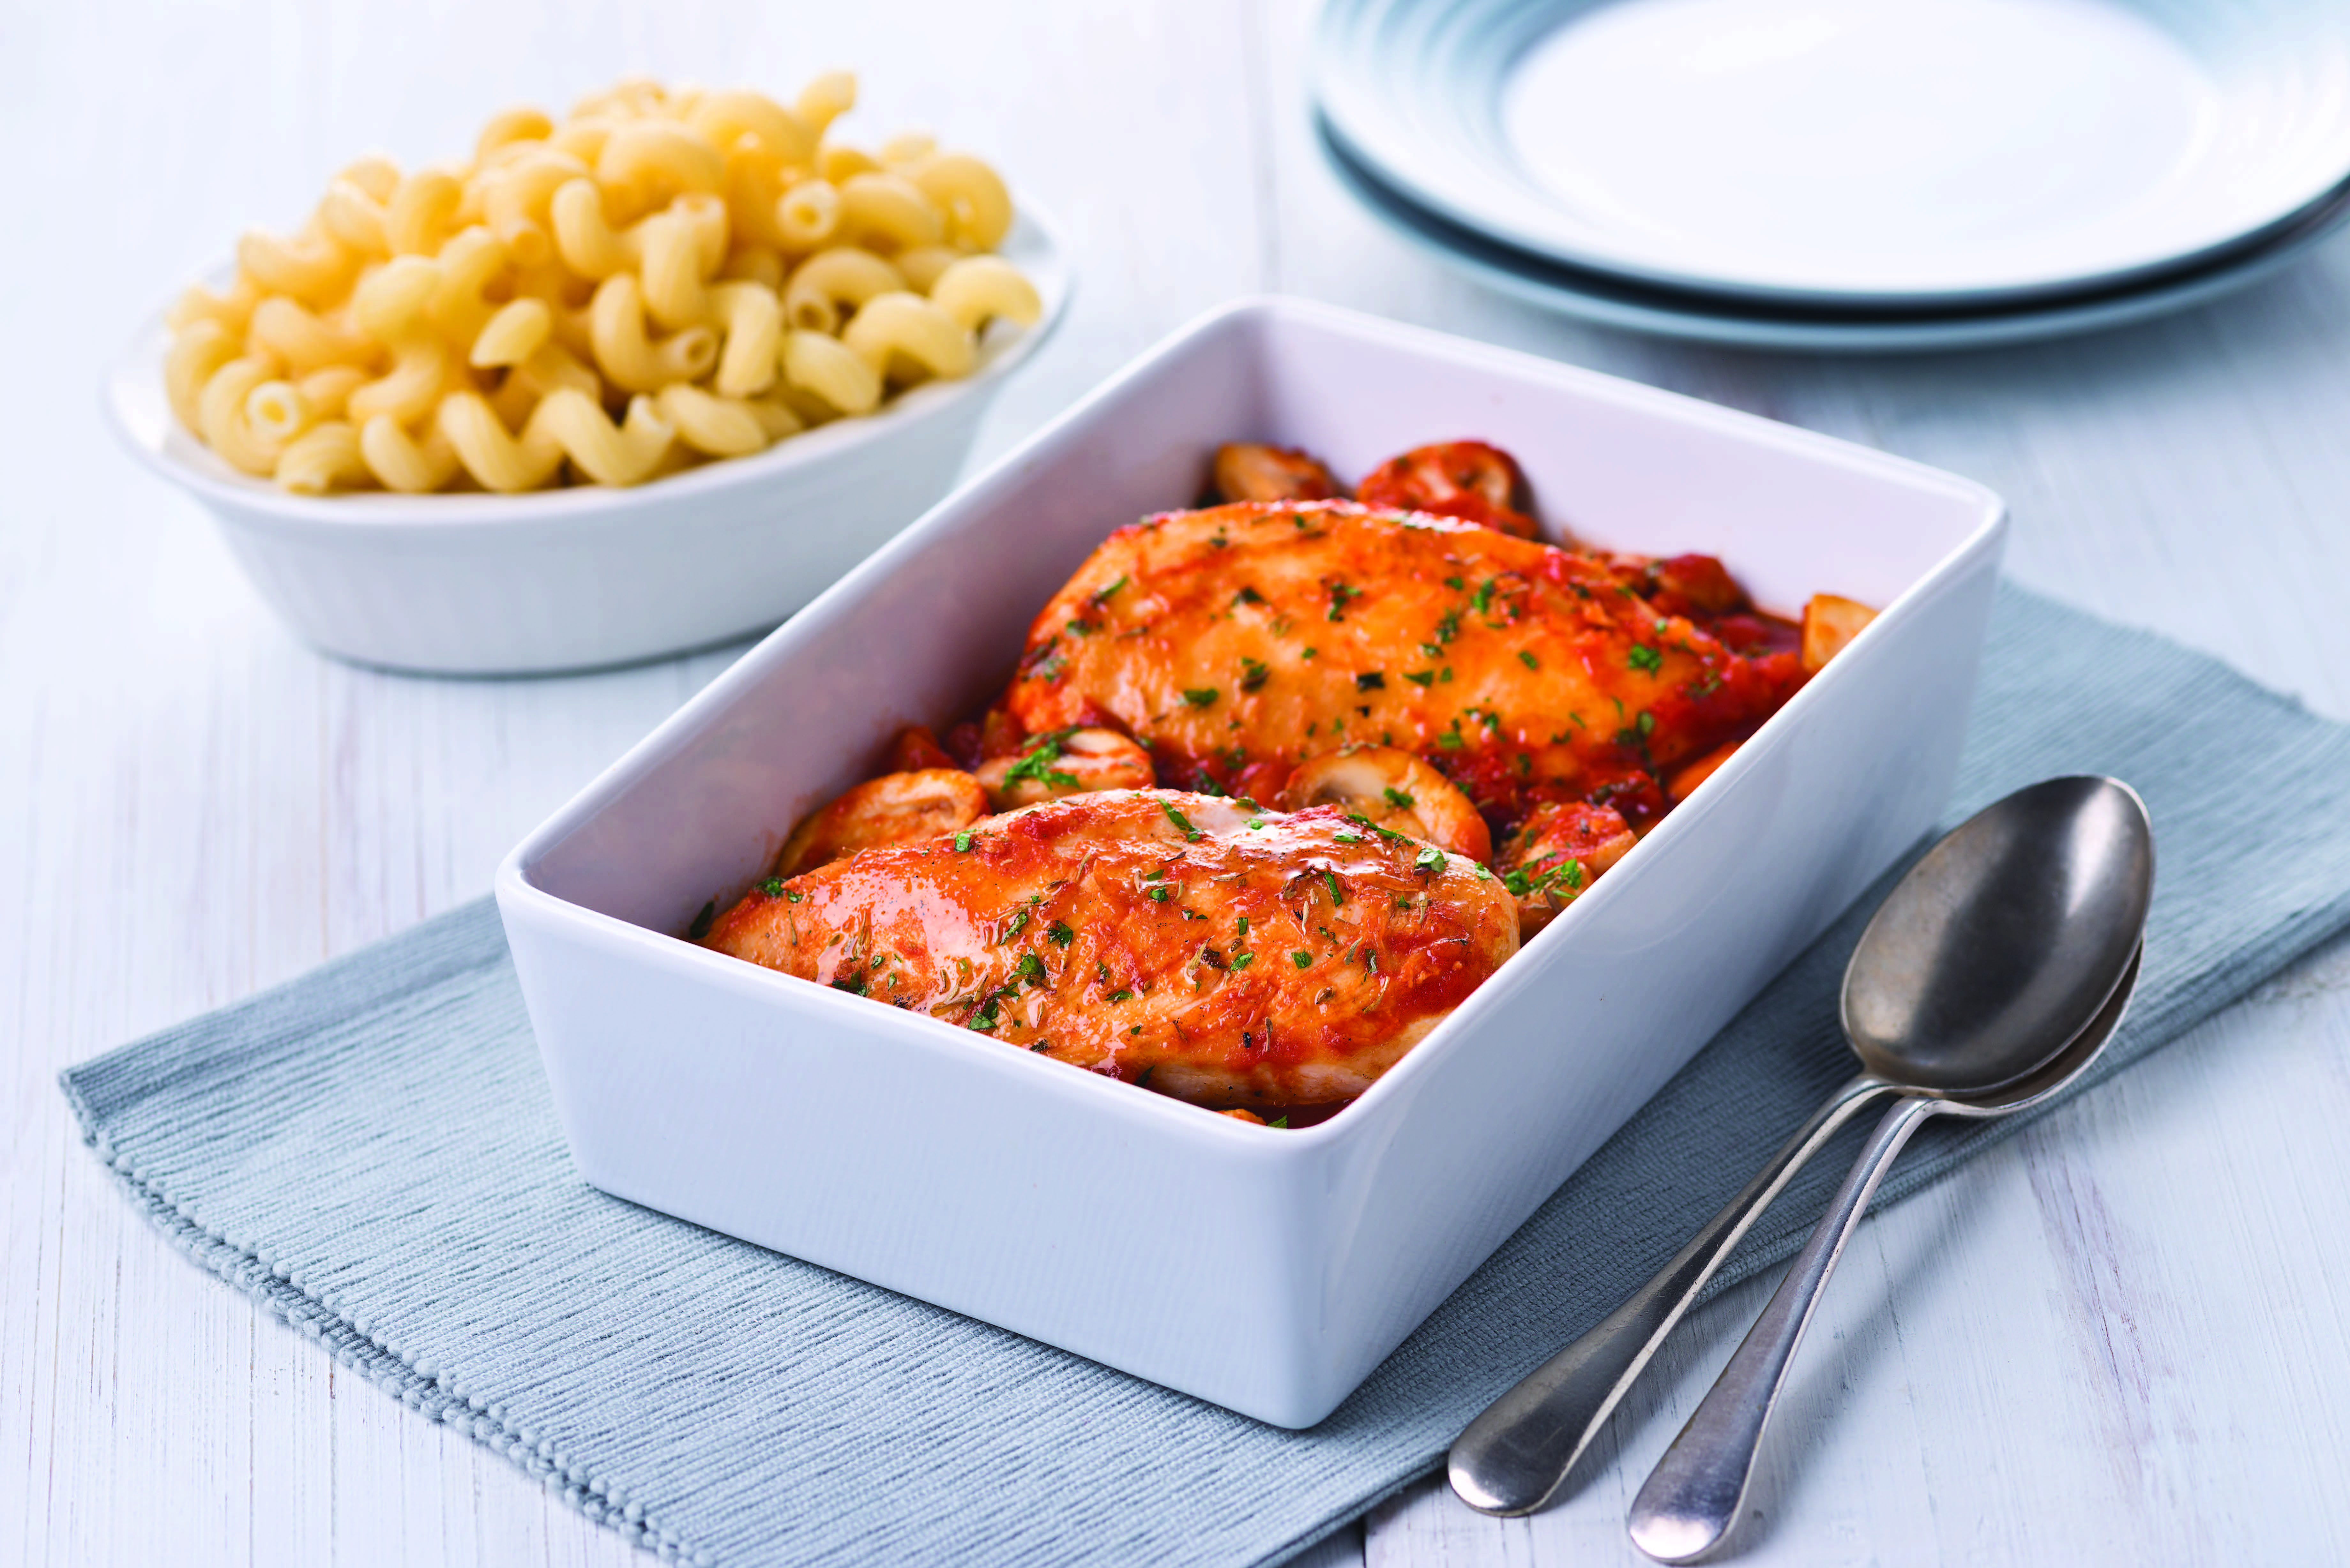 A dish of Easy Italian Chicken served with pasta